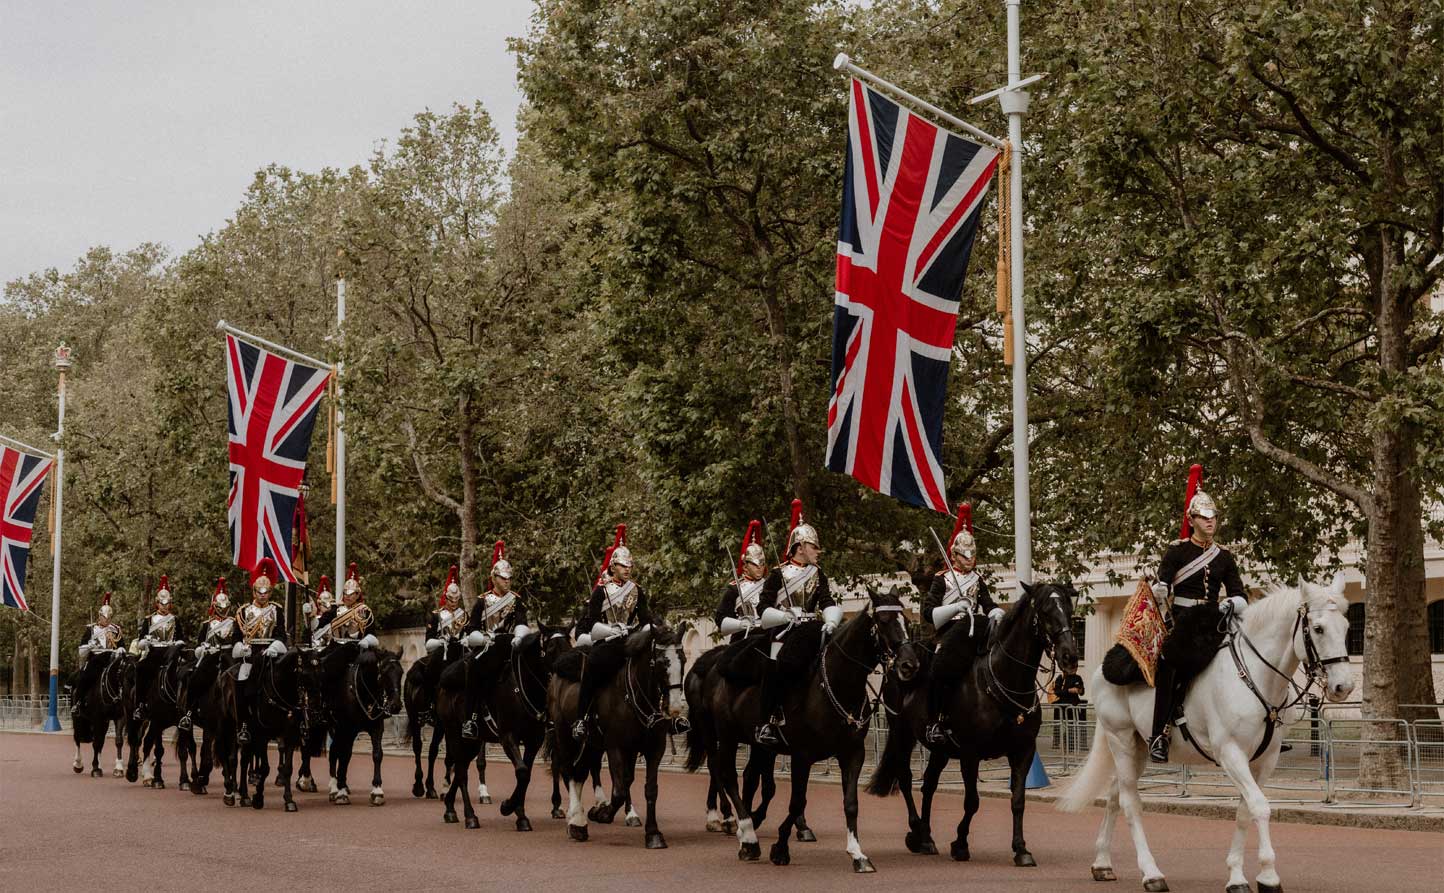 A Majestic Spectacle: Trooping the Colour - A Celebration of Heritage and Style